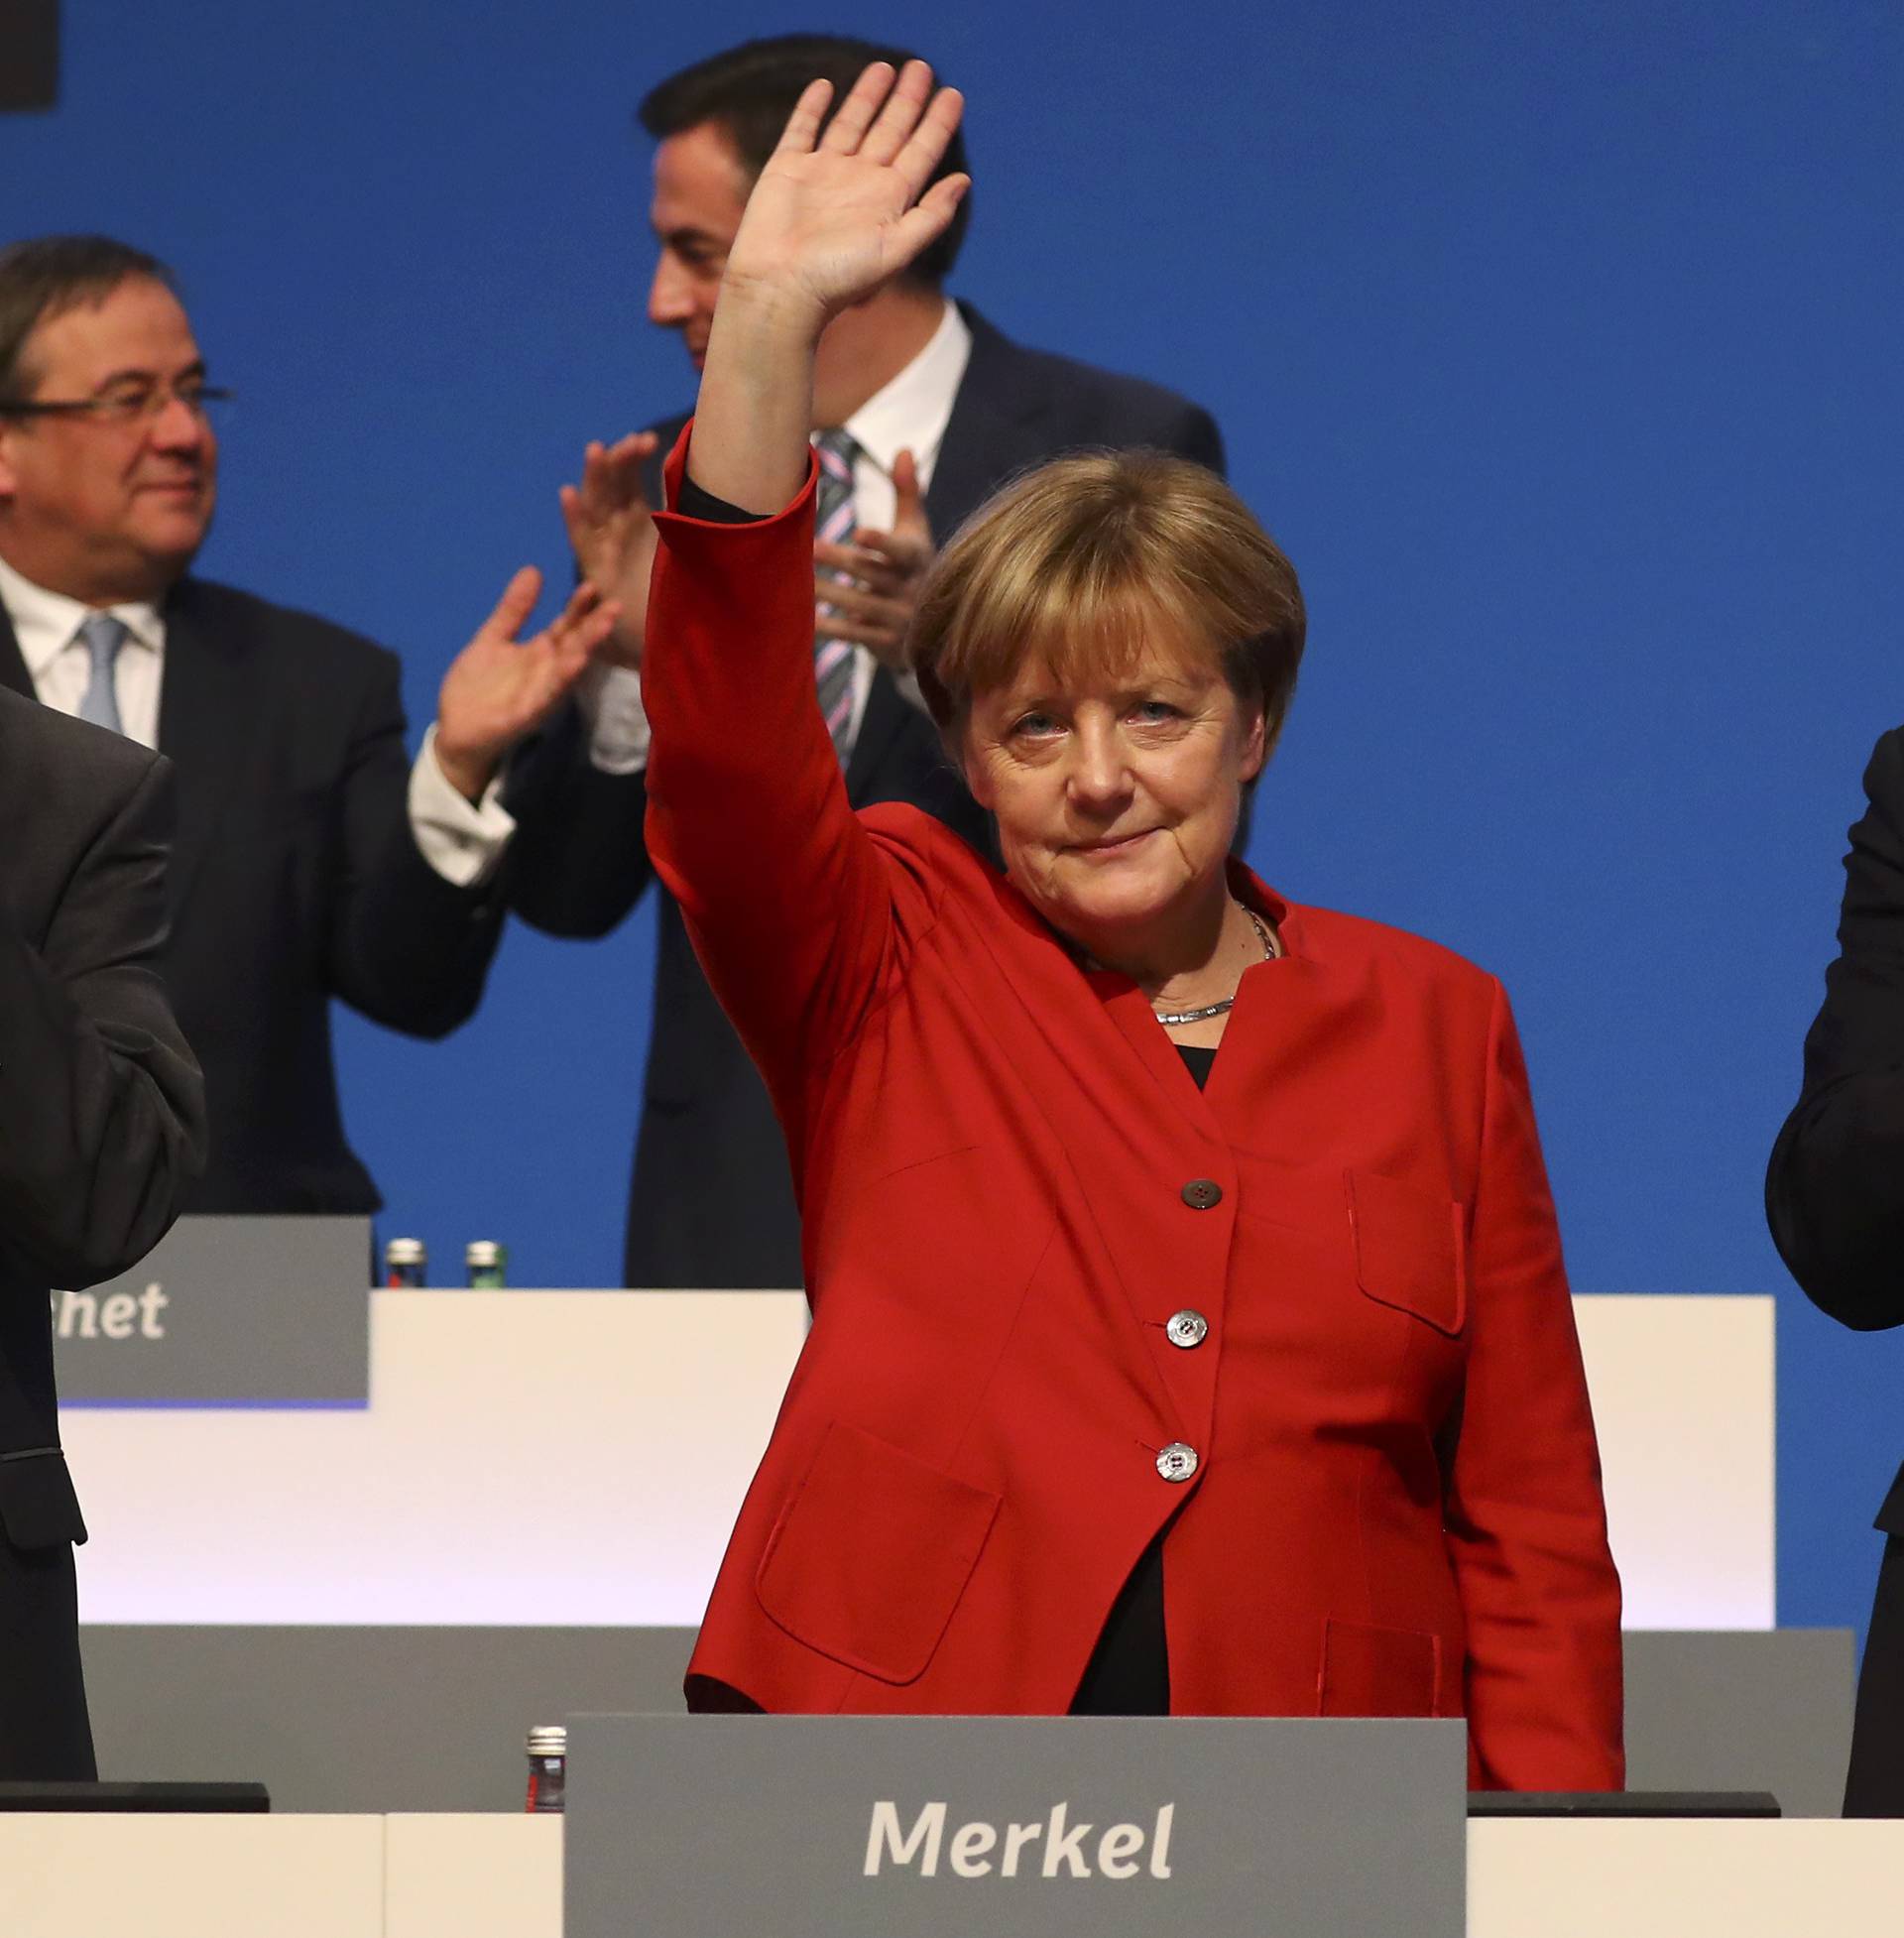 German Chancellor and leader of the conservative CDU Merkel waves after her speech at the CDU party convention in Essen